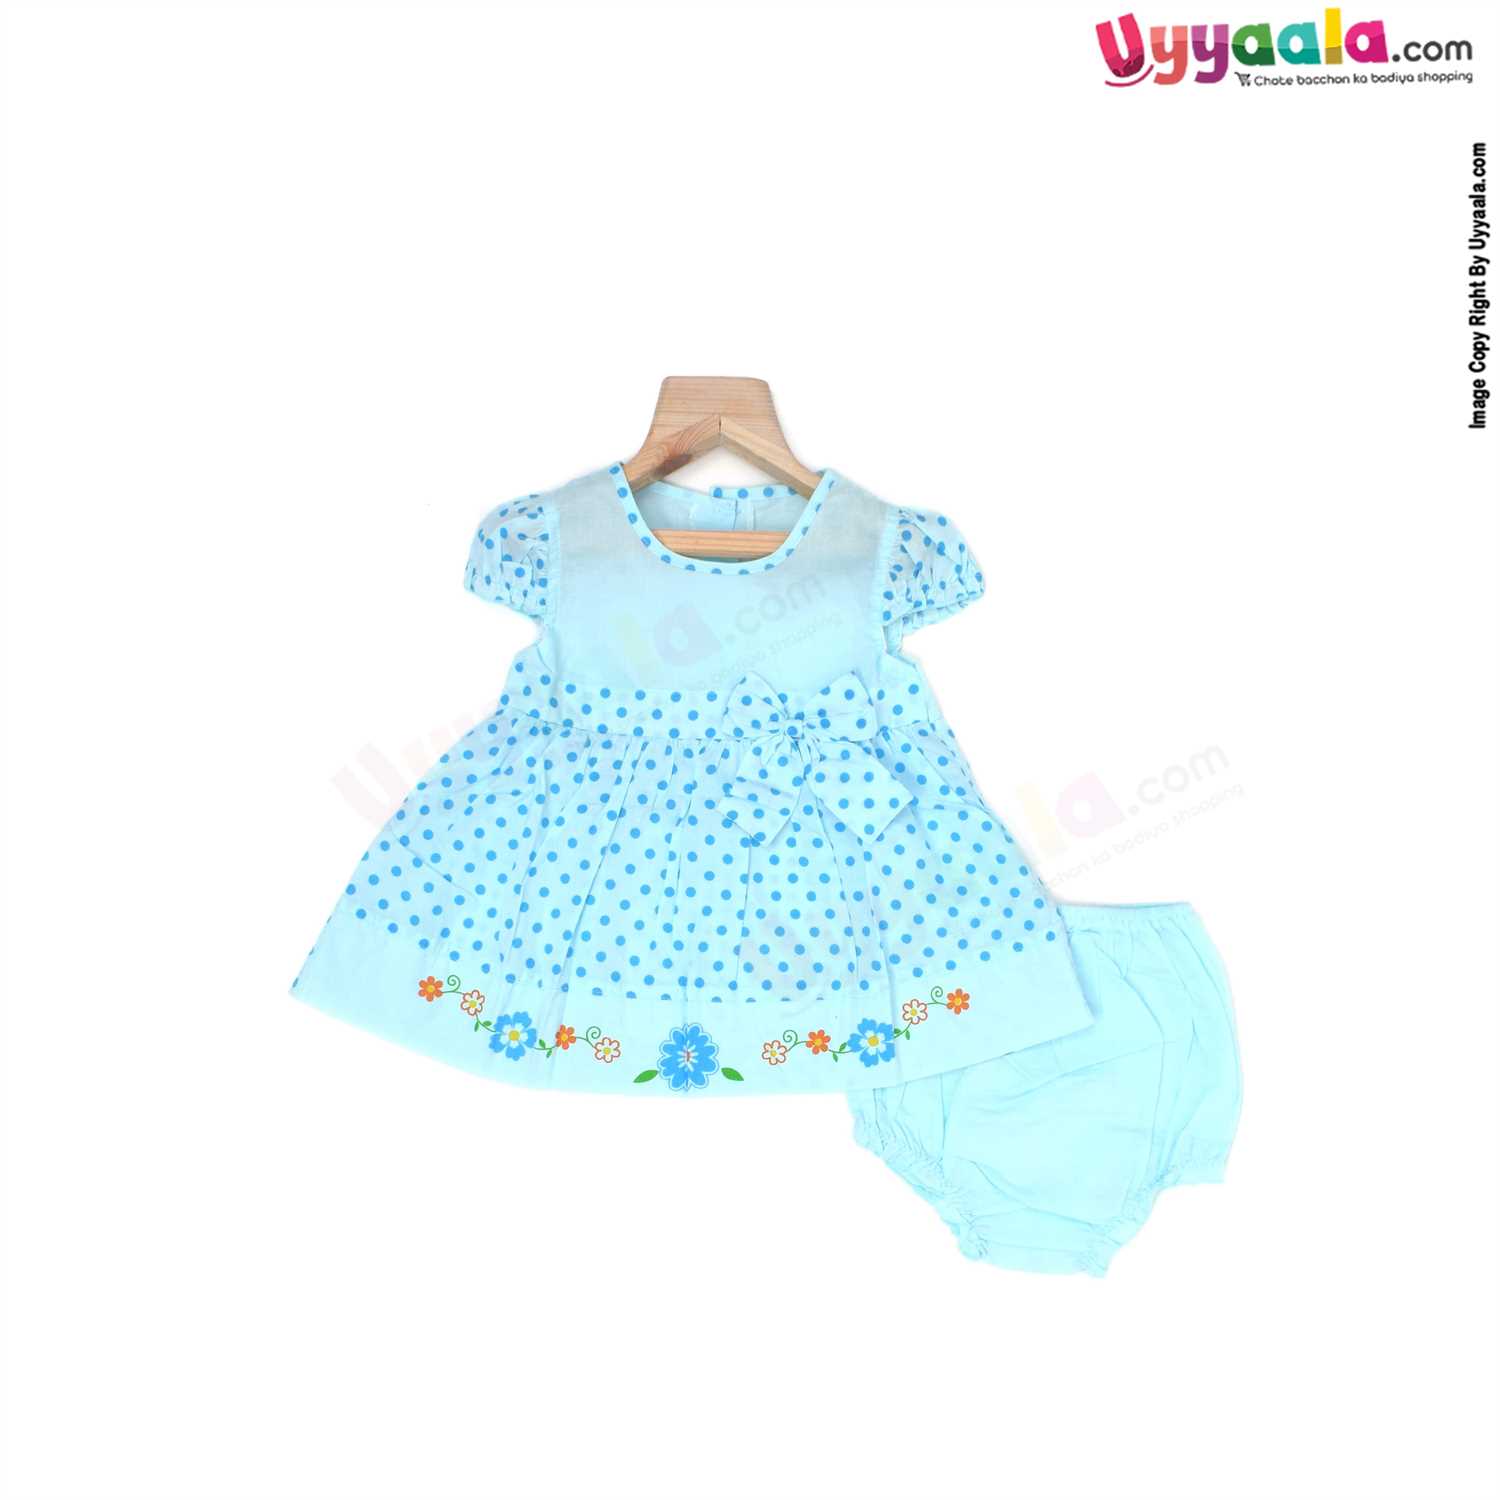 Half Sleeve Baby Frock with Bloomer, Back Open Button Design, Premium Quality Cotton Fabric, Dot Print - - Pink, Orange & Blue